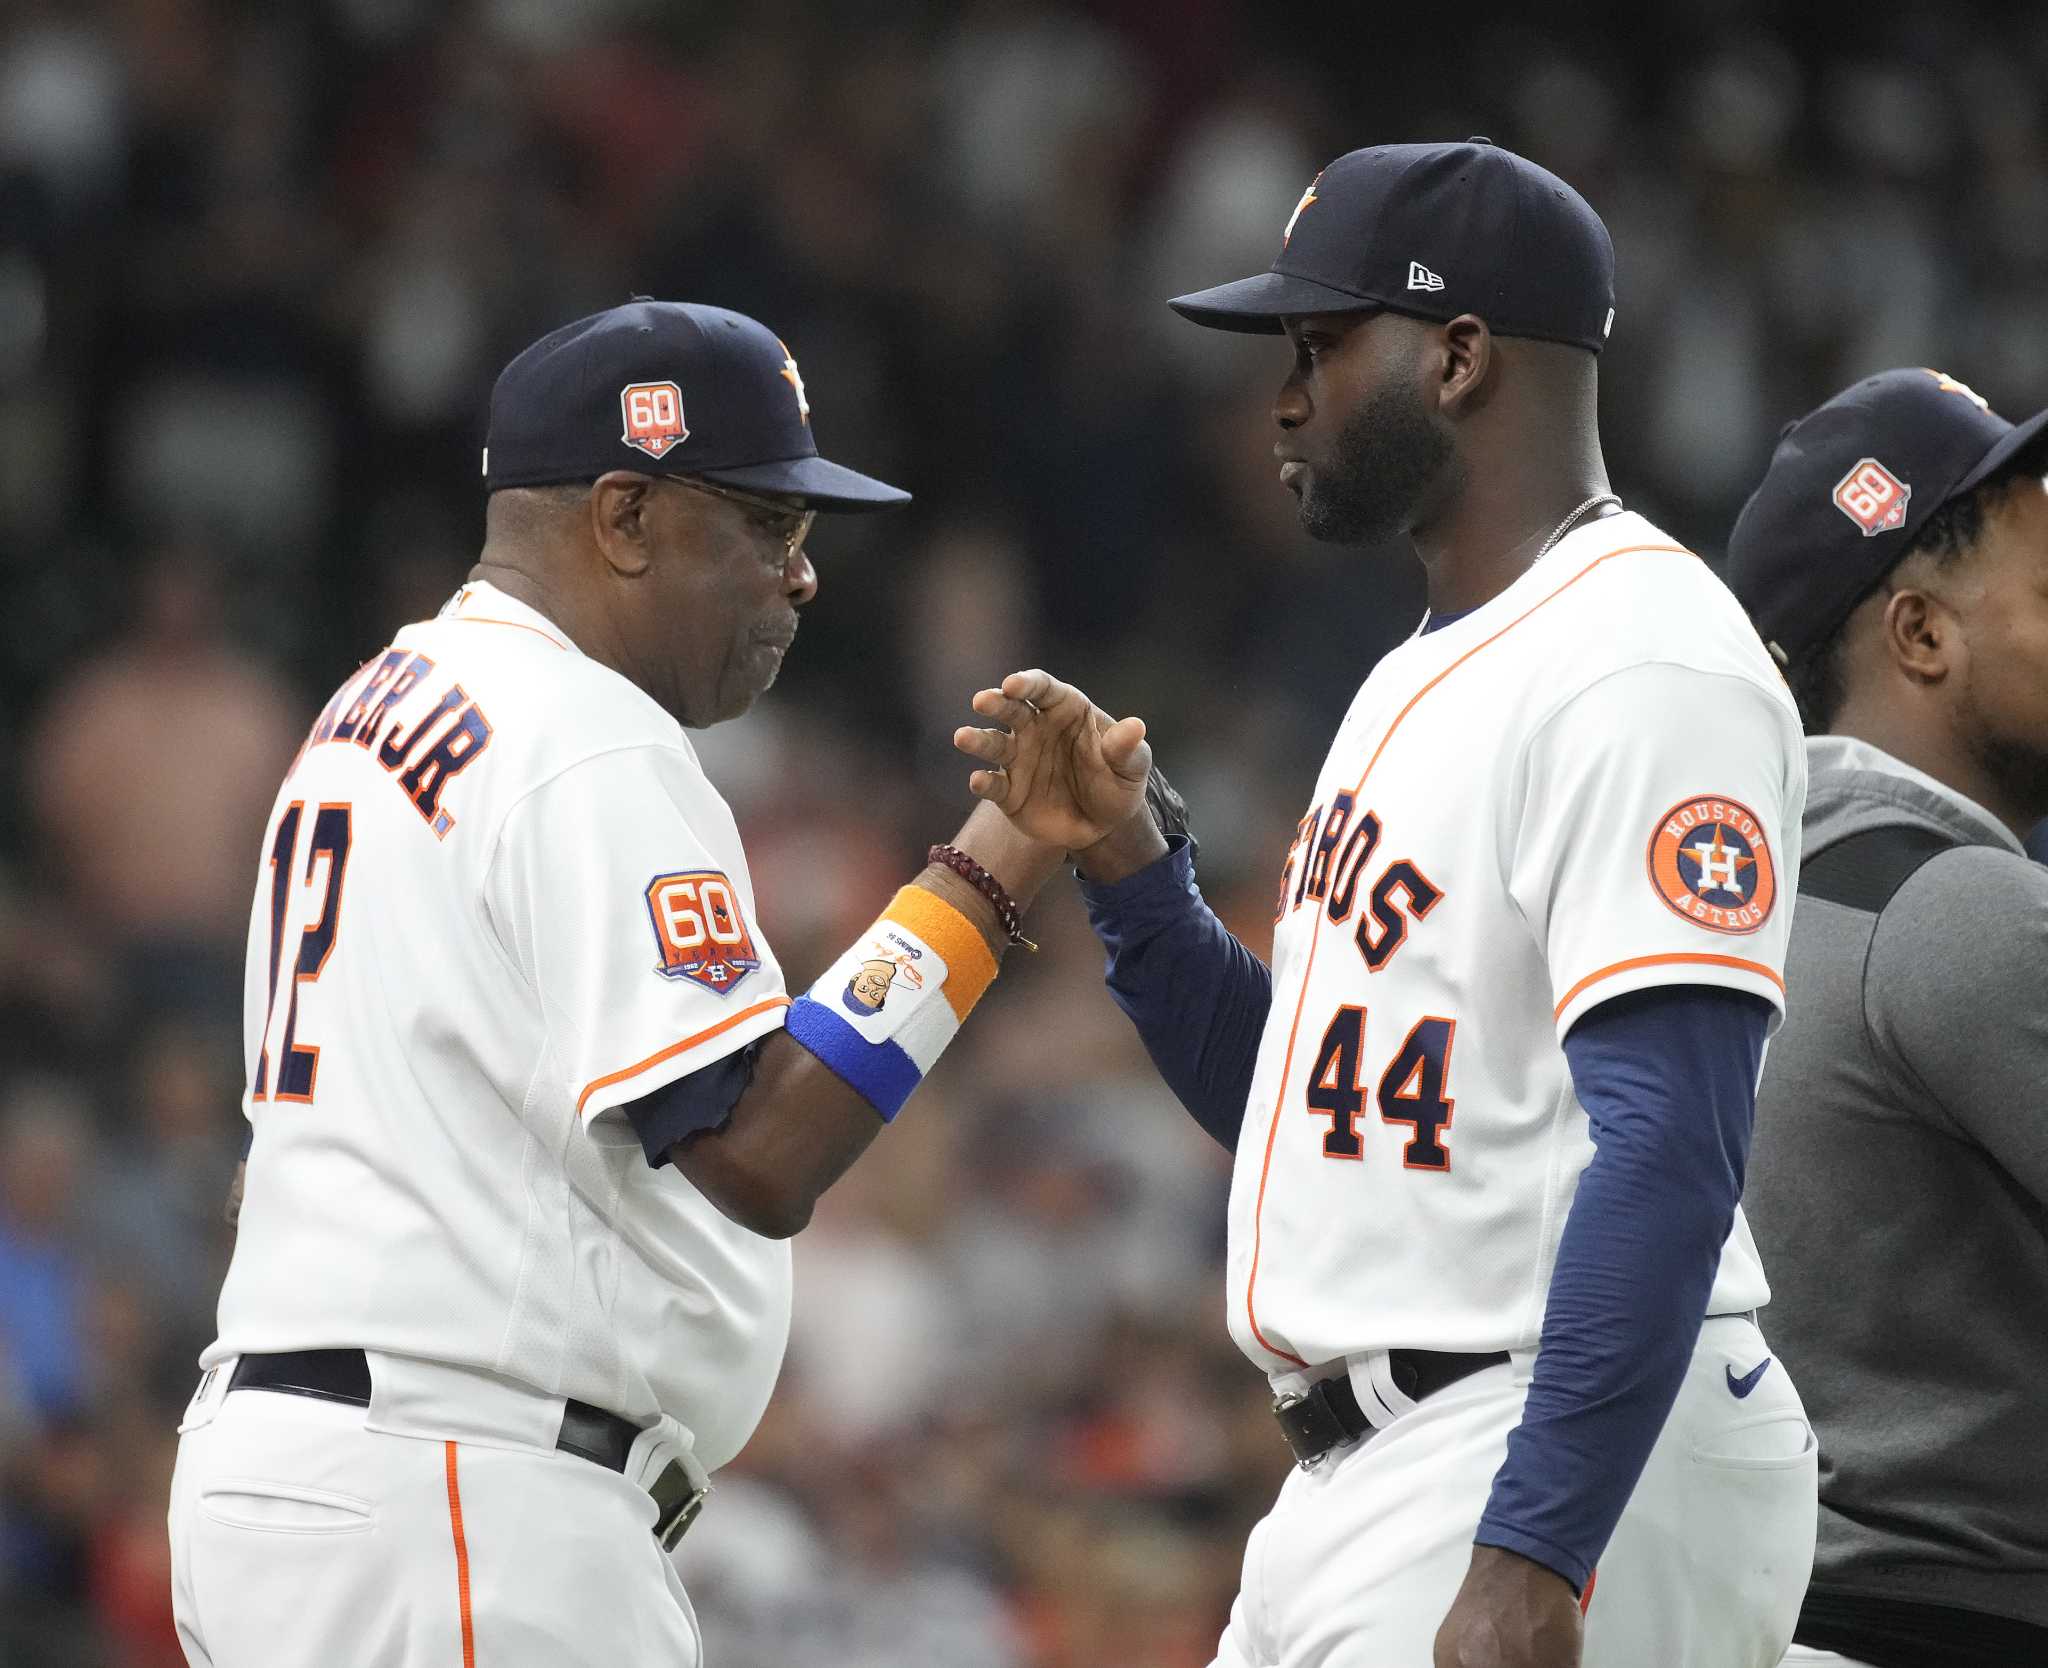 Dusty Baker drives Astros by forming bonds with his players